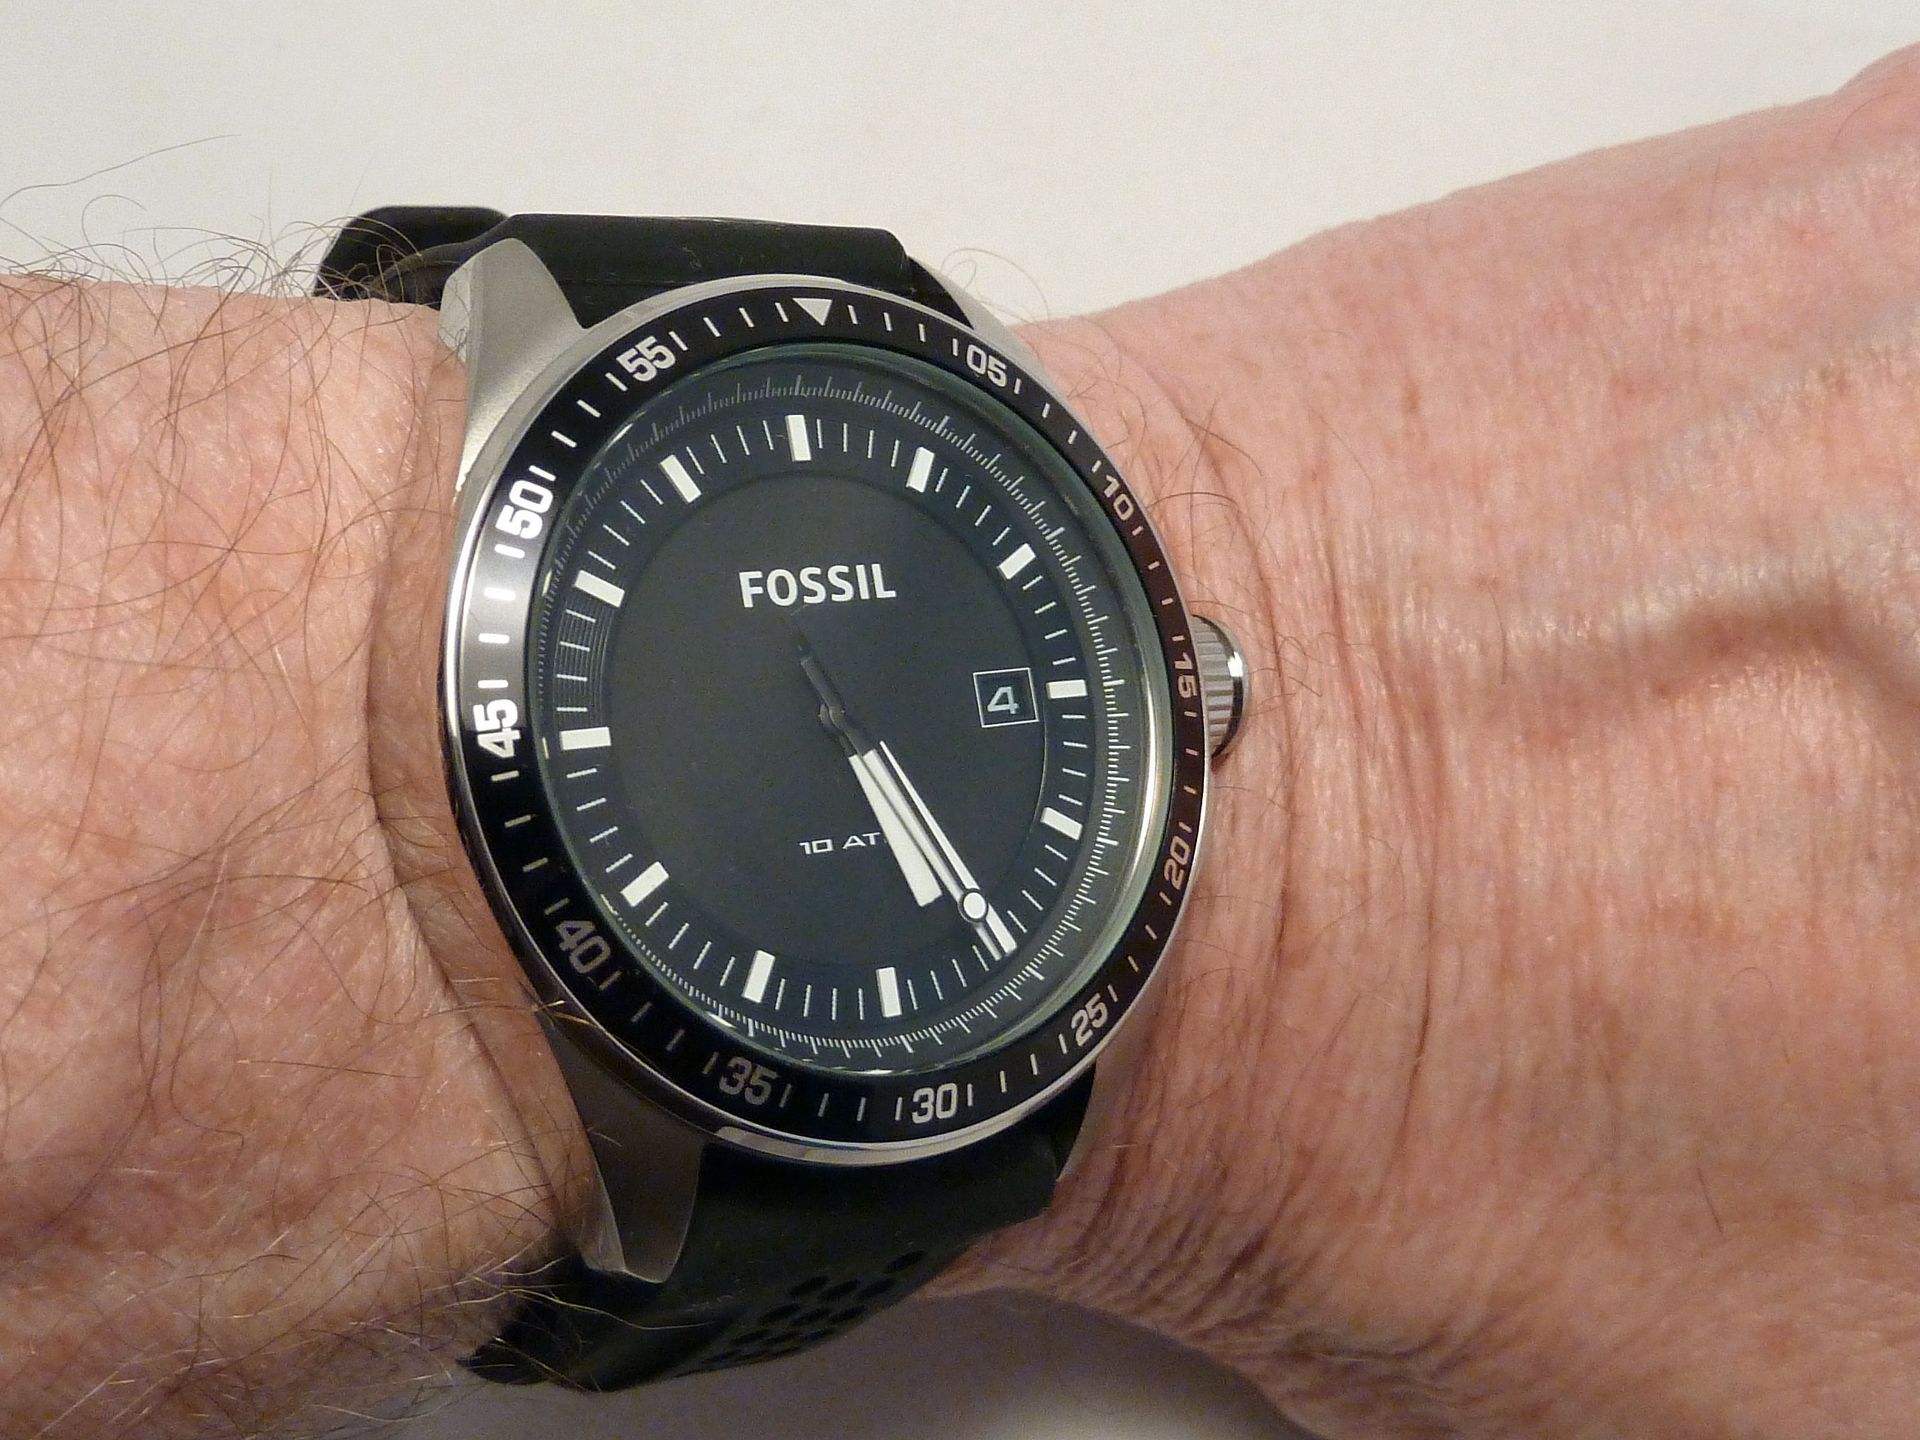 Fossil “Decker” - AM4384 Black silicon Strap Date watch. - Image 4 of 5